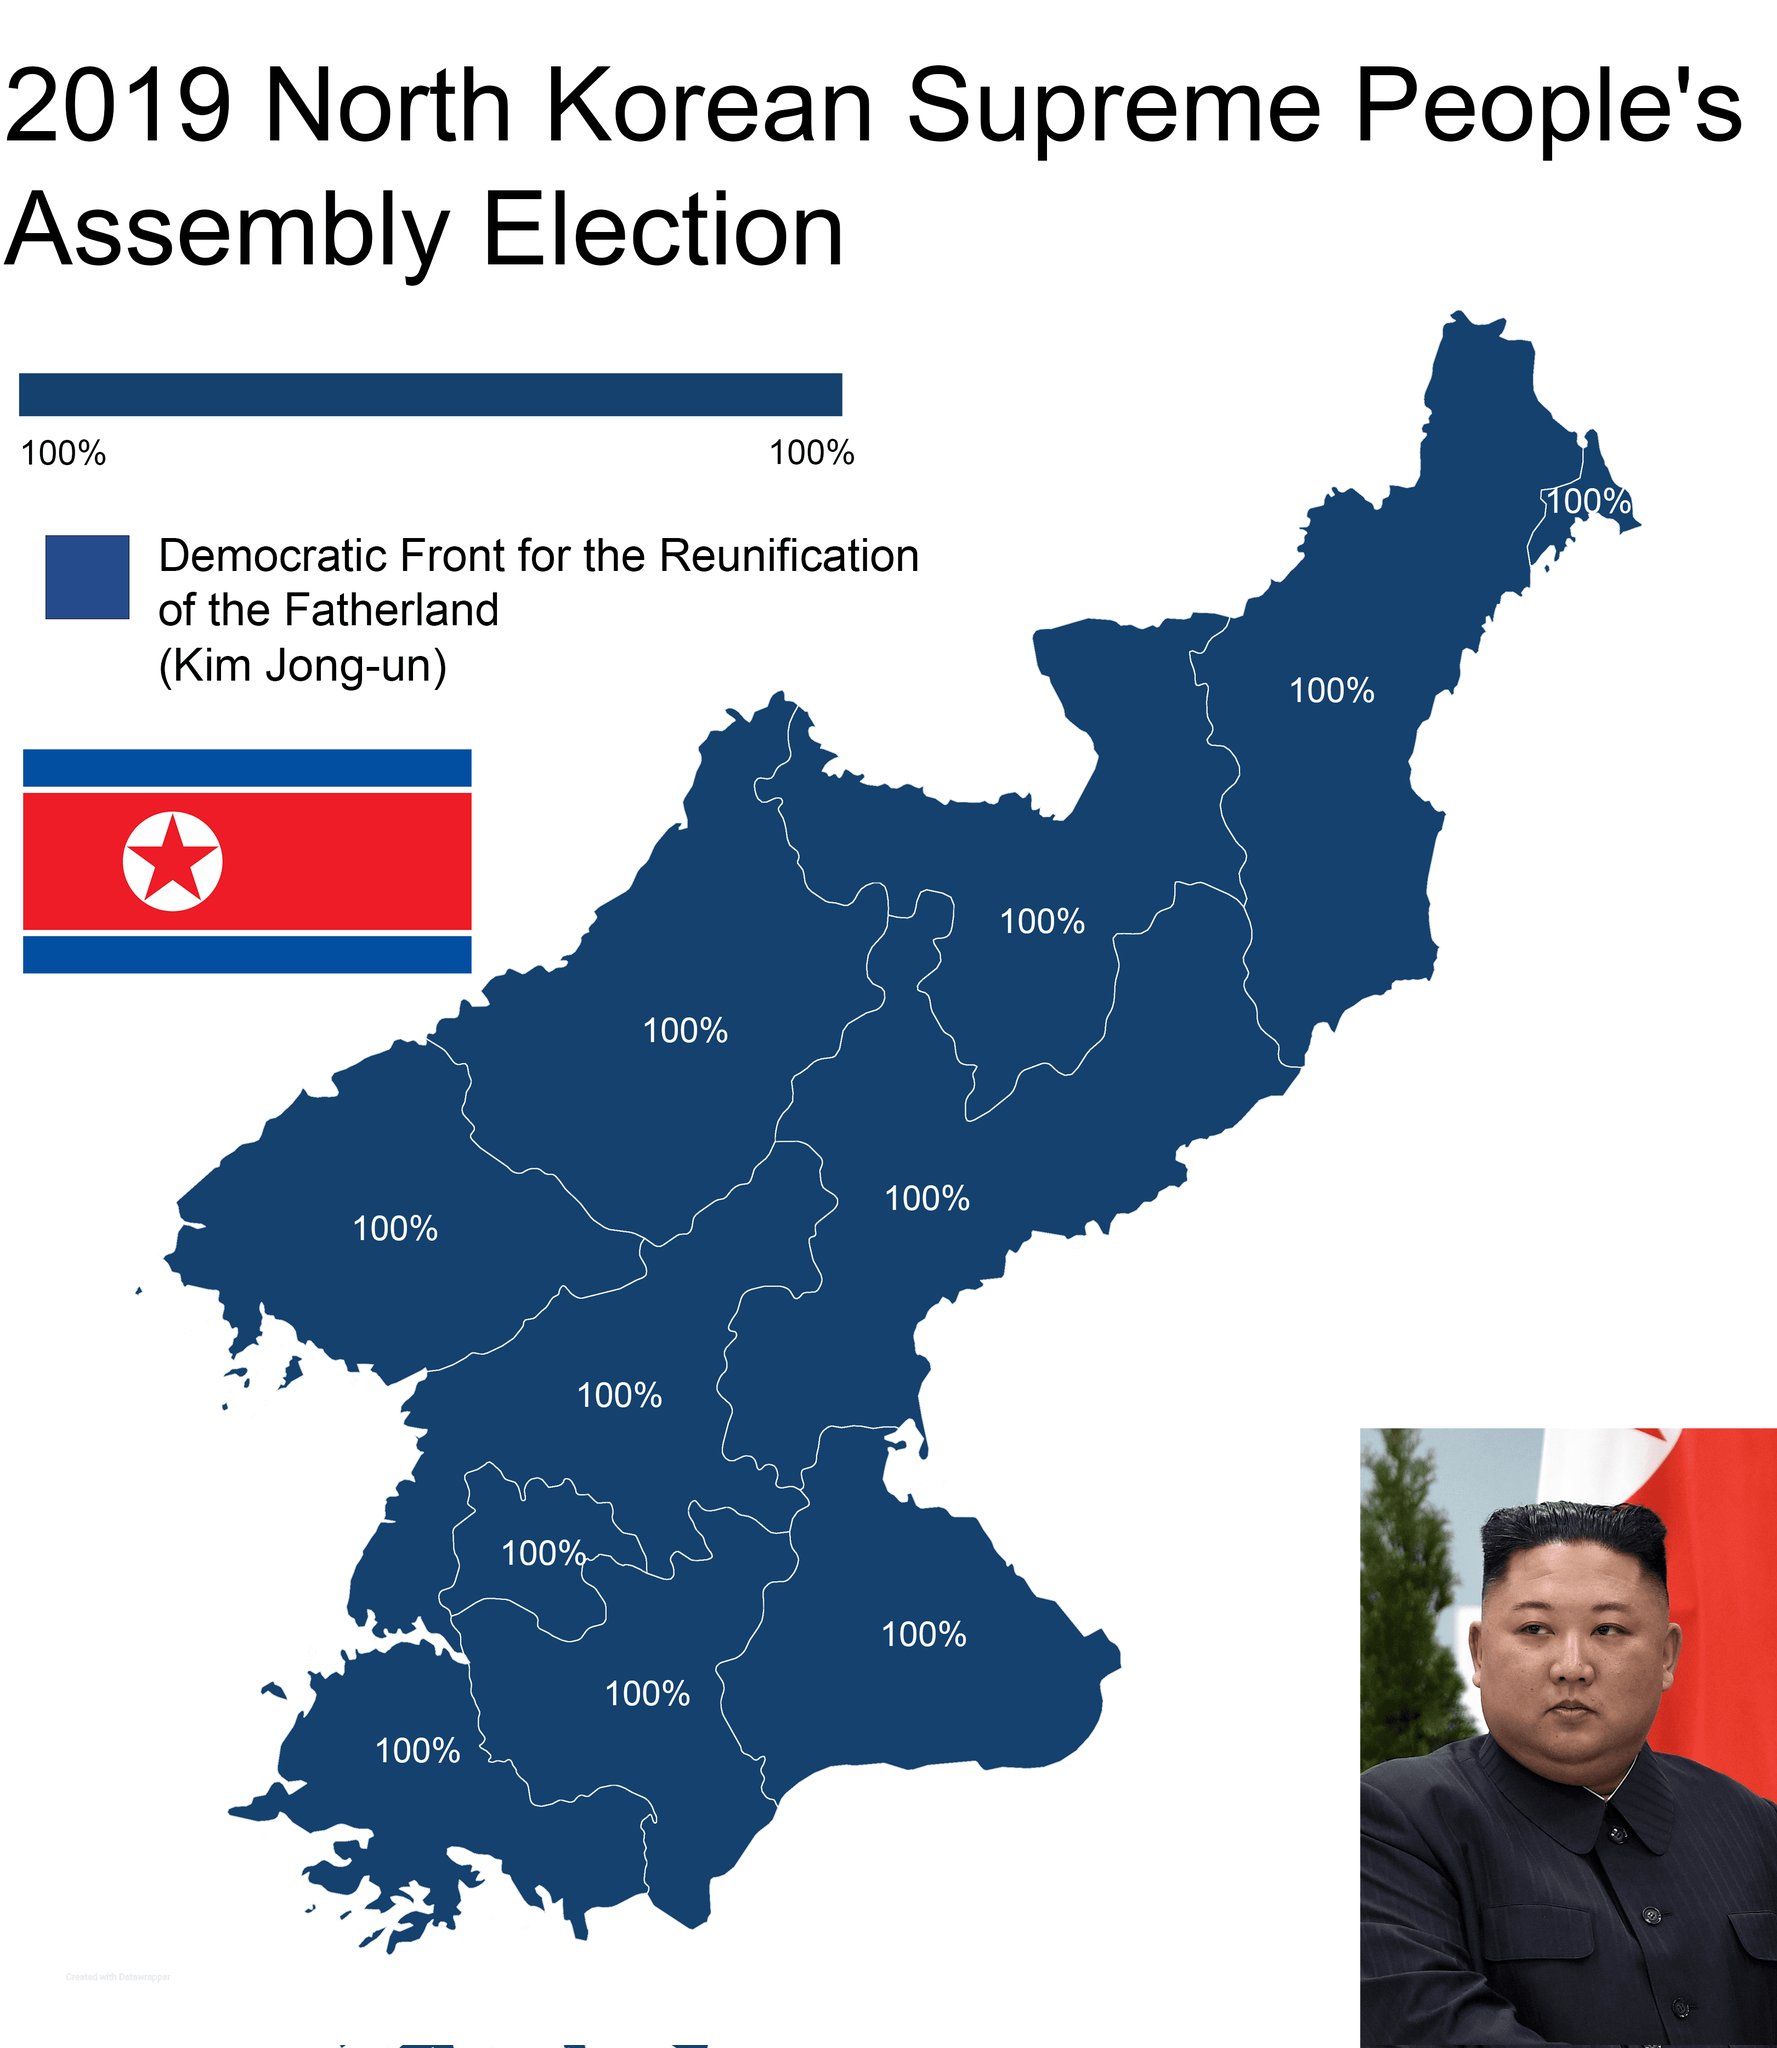 Terrible Maps - north korea map png - 2019 North Korean Supreme People's Assembly Election 100% 100% 5100% Democratic Front for the Reunification of the Fatherland Kim Jongun 100% 100% 100% 100% 100% 100% 100% 100% 100% 100%